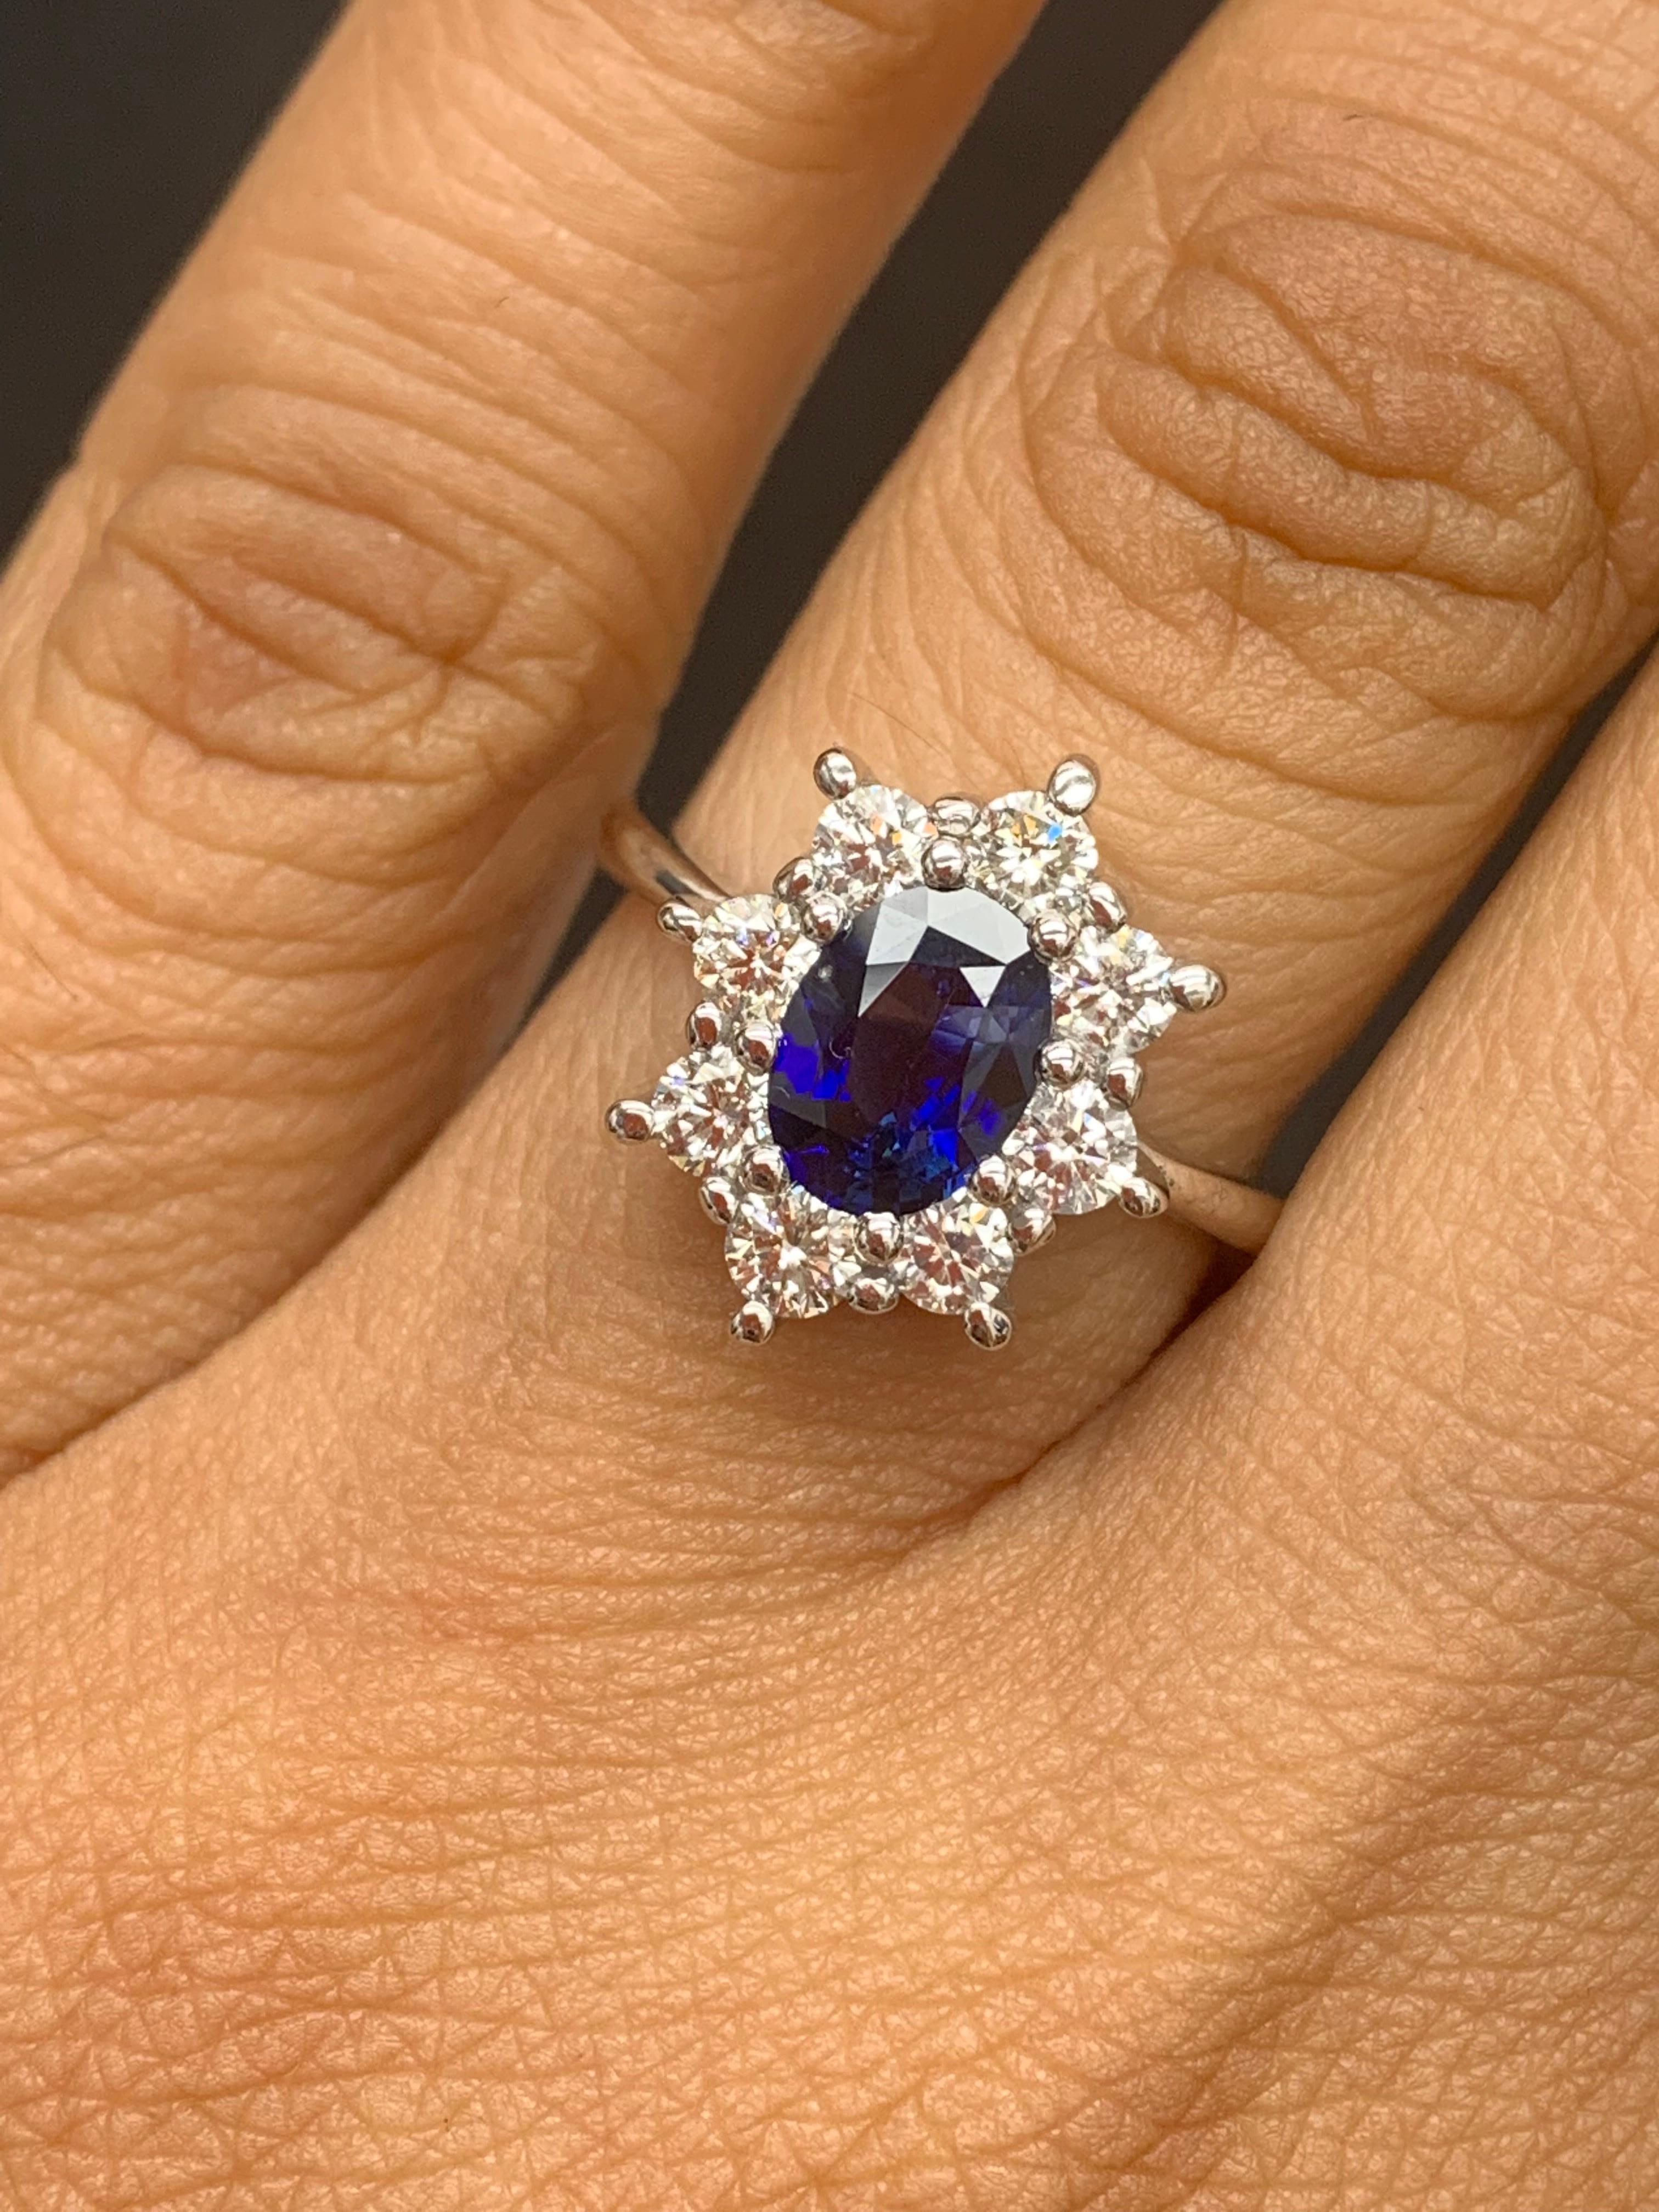 A stunning well-crafted engagement ring showcasing a 1.55-carat oval cut blue sapphire. Flanking the center diamond is perfectly matched brilliant cut 8 diamonds weighing 1.41 carat in total, set in a polished 14K White Gold mounting. Handcrafted in